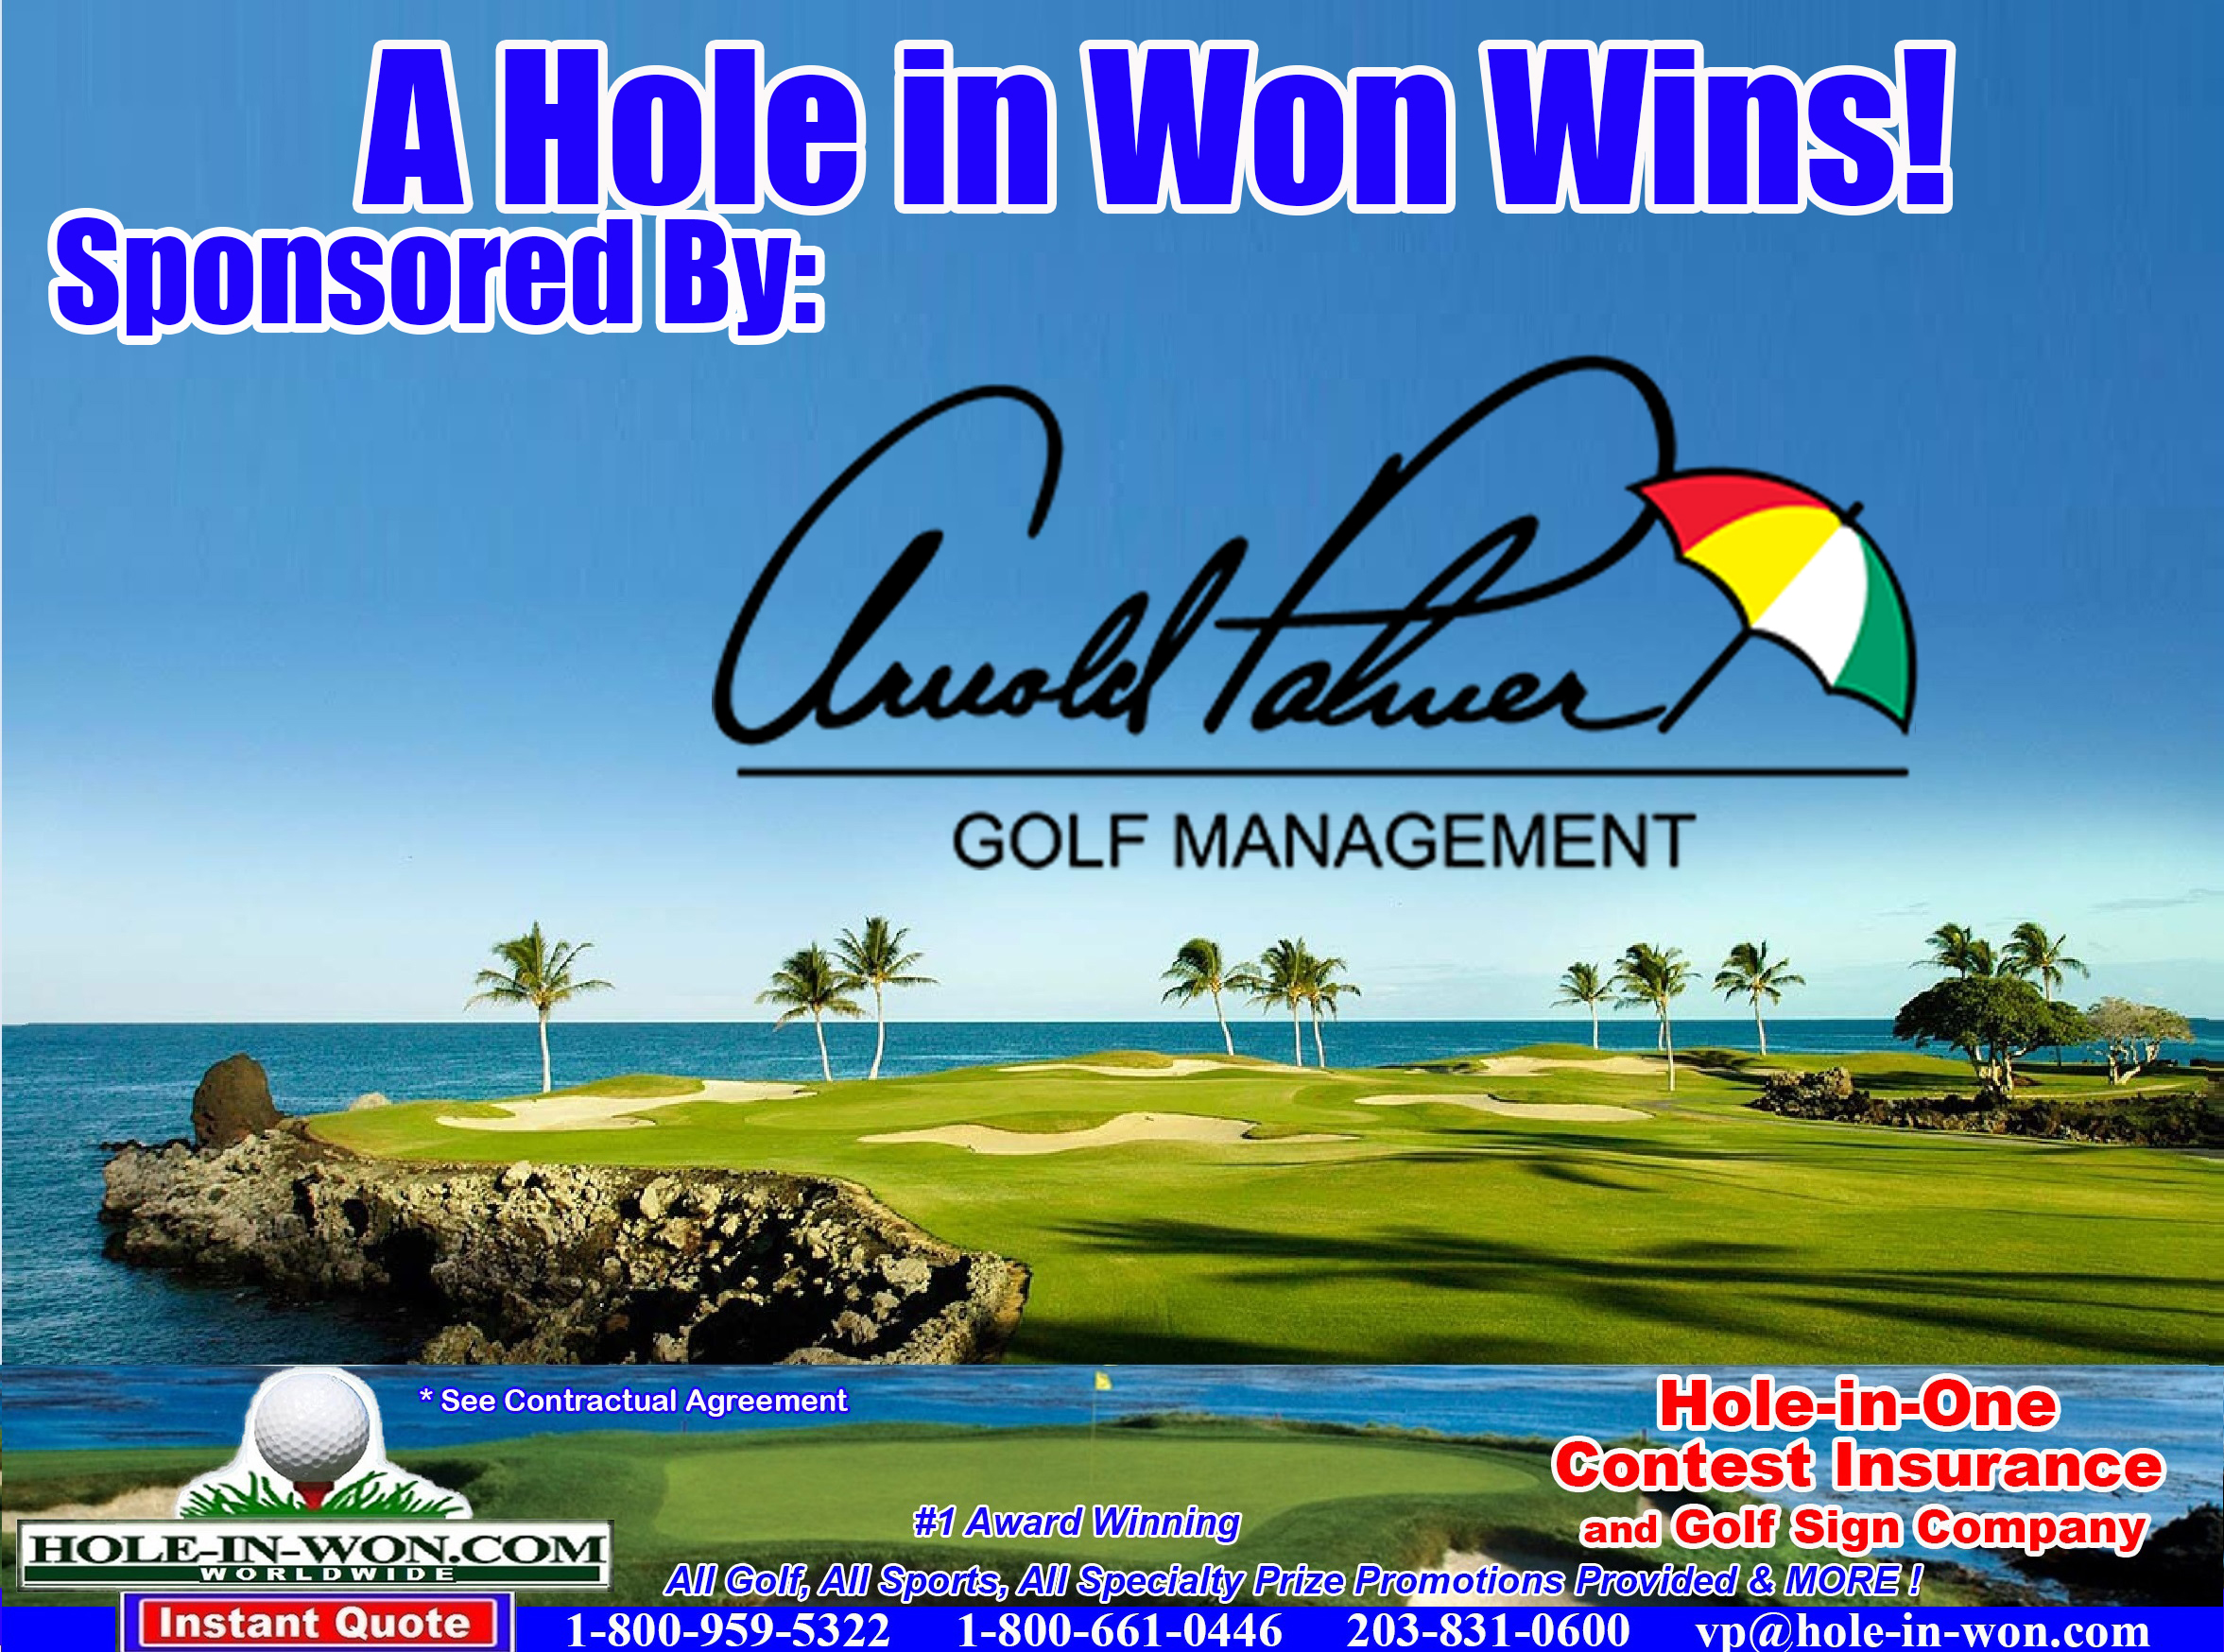 Golf Management Hole in One Insurance